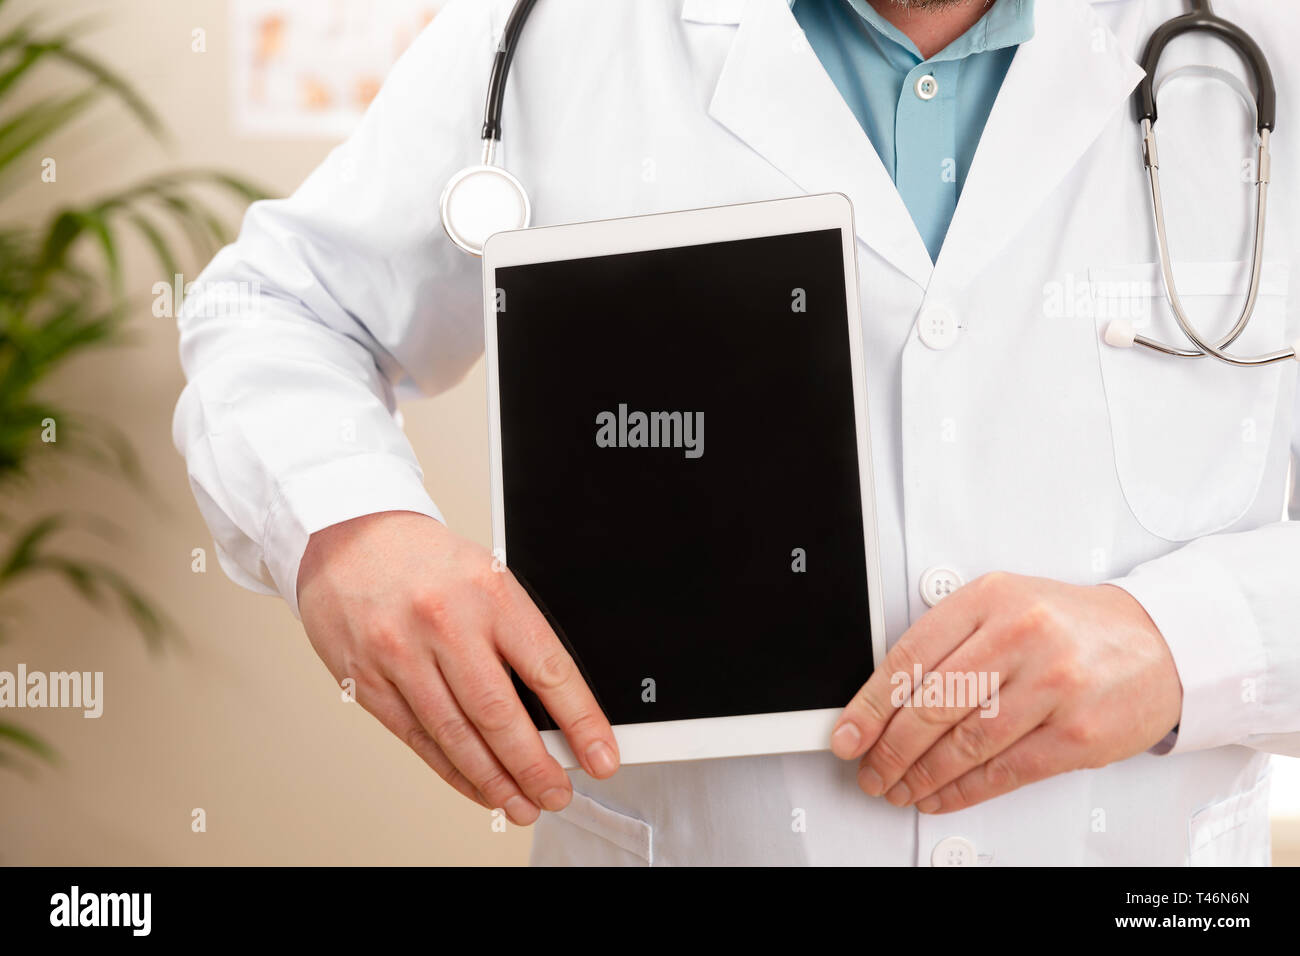 Adult male doctor showing a digital image or report on a tablet Stock Photo